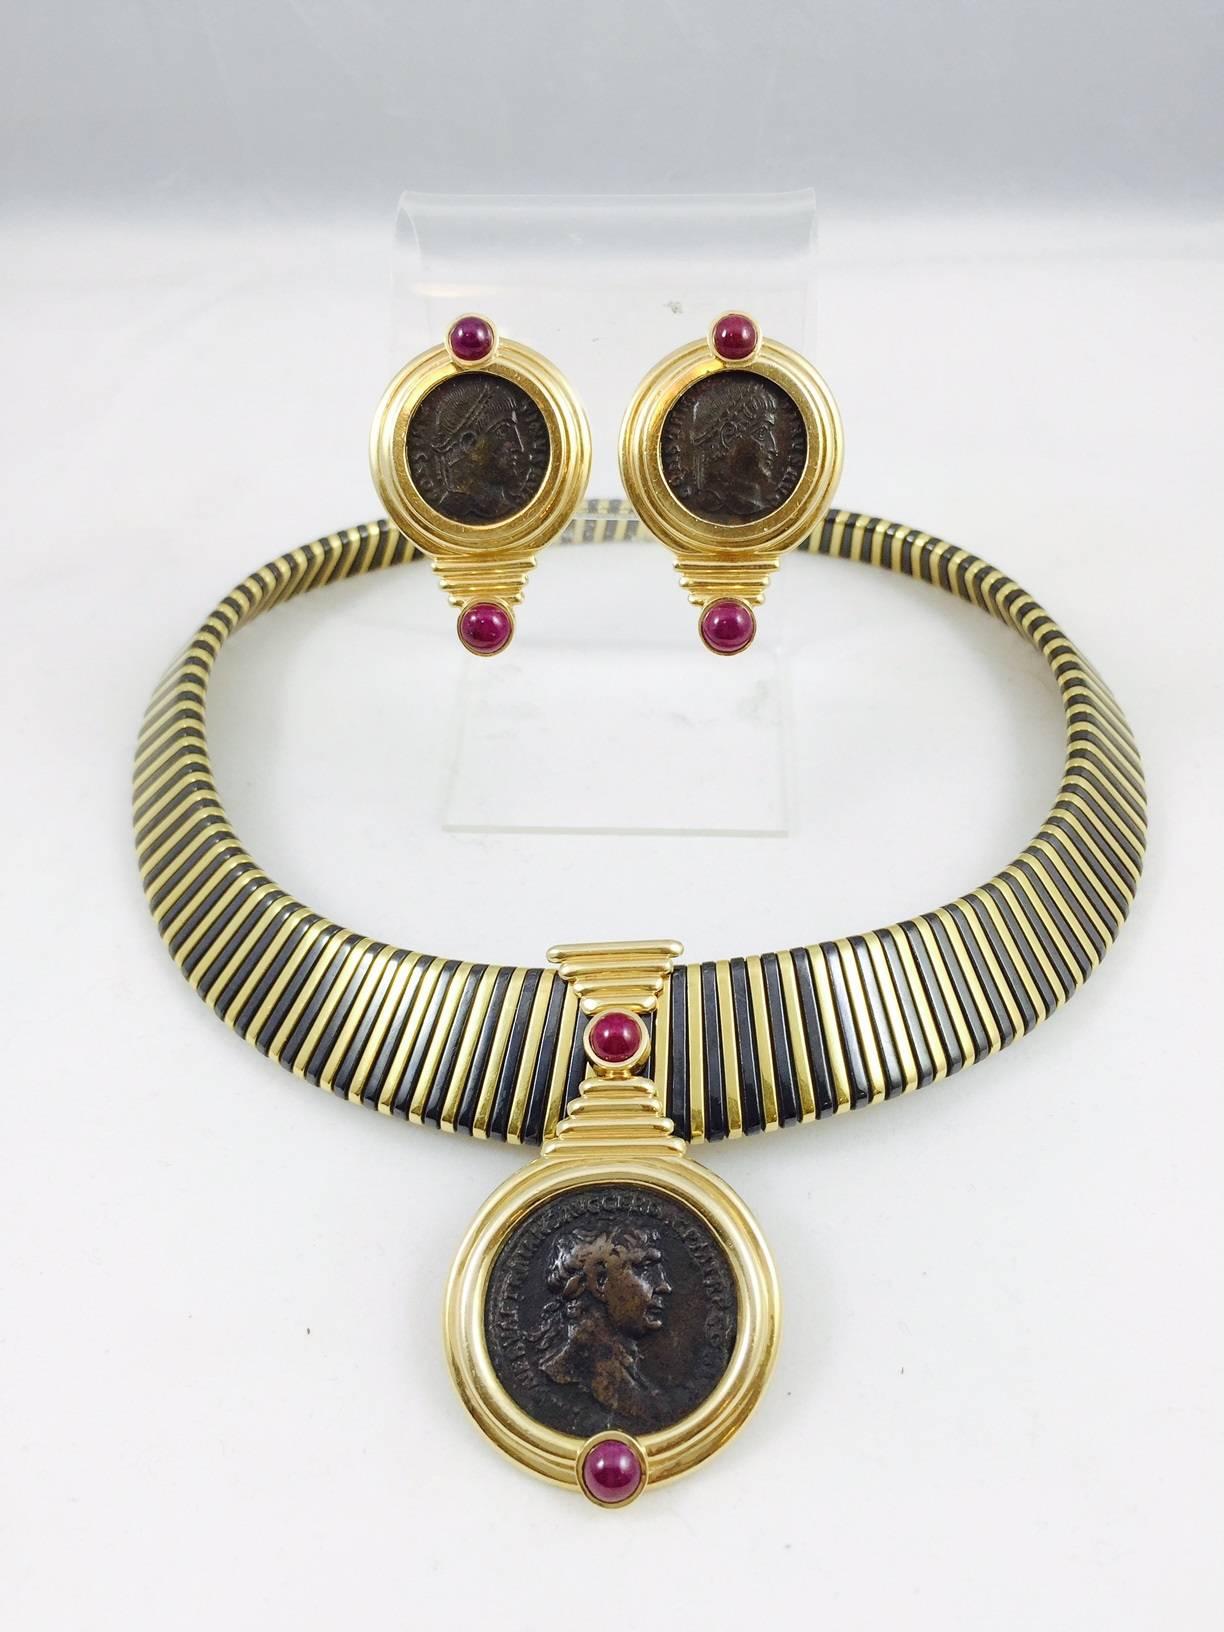 Let's begin by discussing this outstanding choker.  Classic tubogas design incorporating blackened steel between 18 karat yellow gold. A striking combination!  The antique Greek coin centered enhancer has a snap down clasp with figure 8 safety